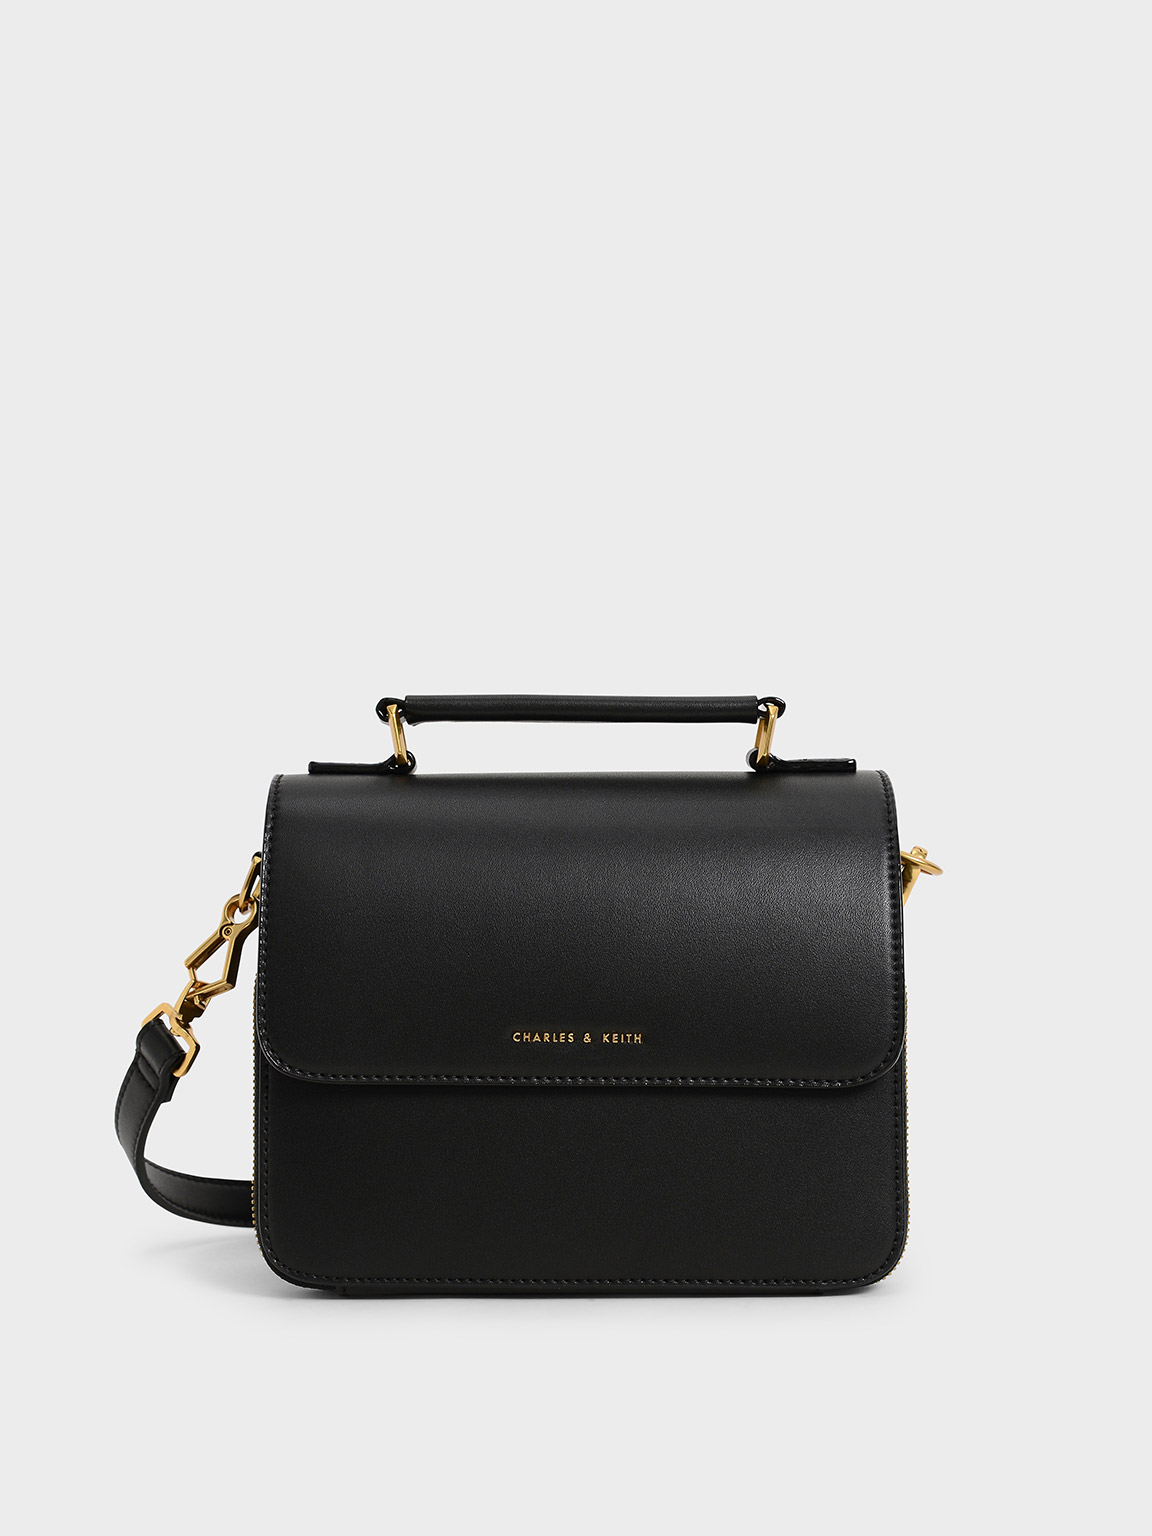 Charles & Keith Women's Front Flap Crossbody Bag